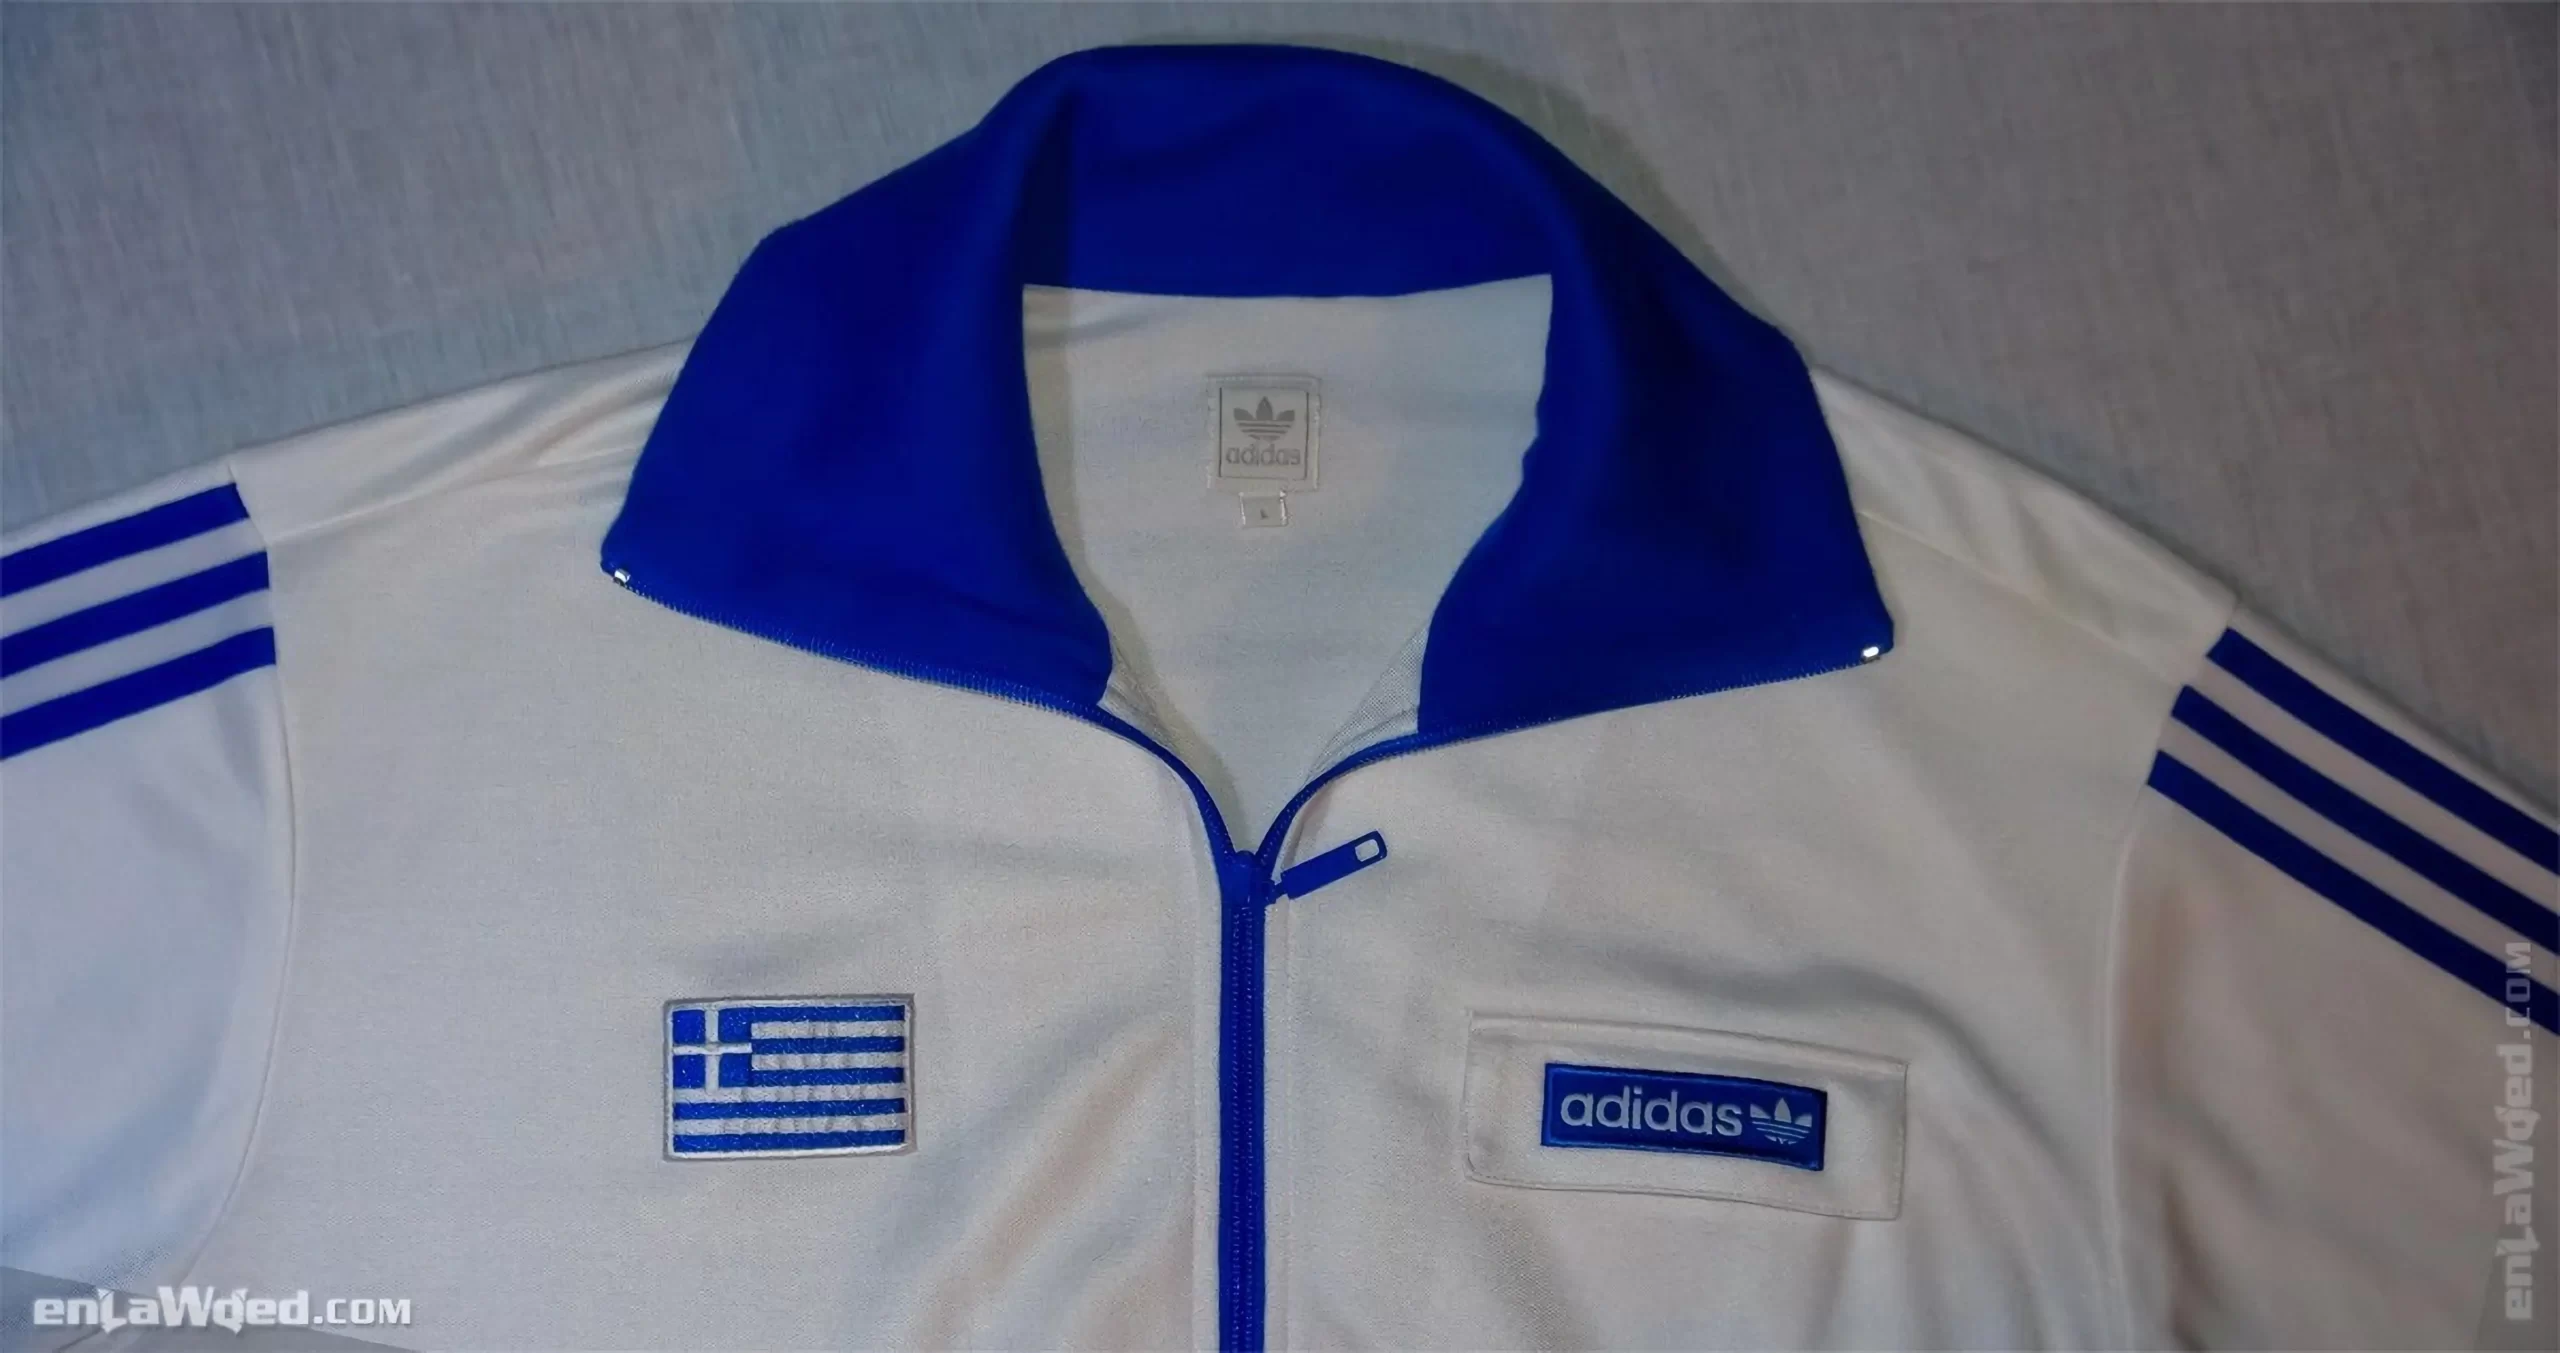 Men’s 2003 Greece Track Top by Adidas: Natural (EnLawded.com file #lmch4luwe2lp6zzvefc)